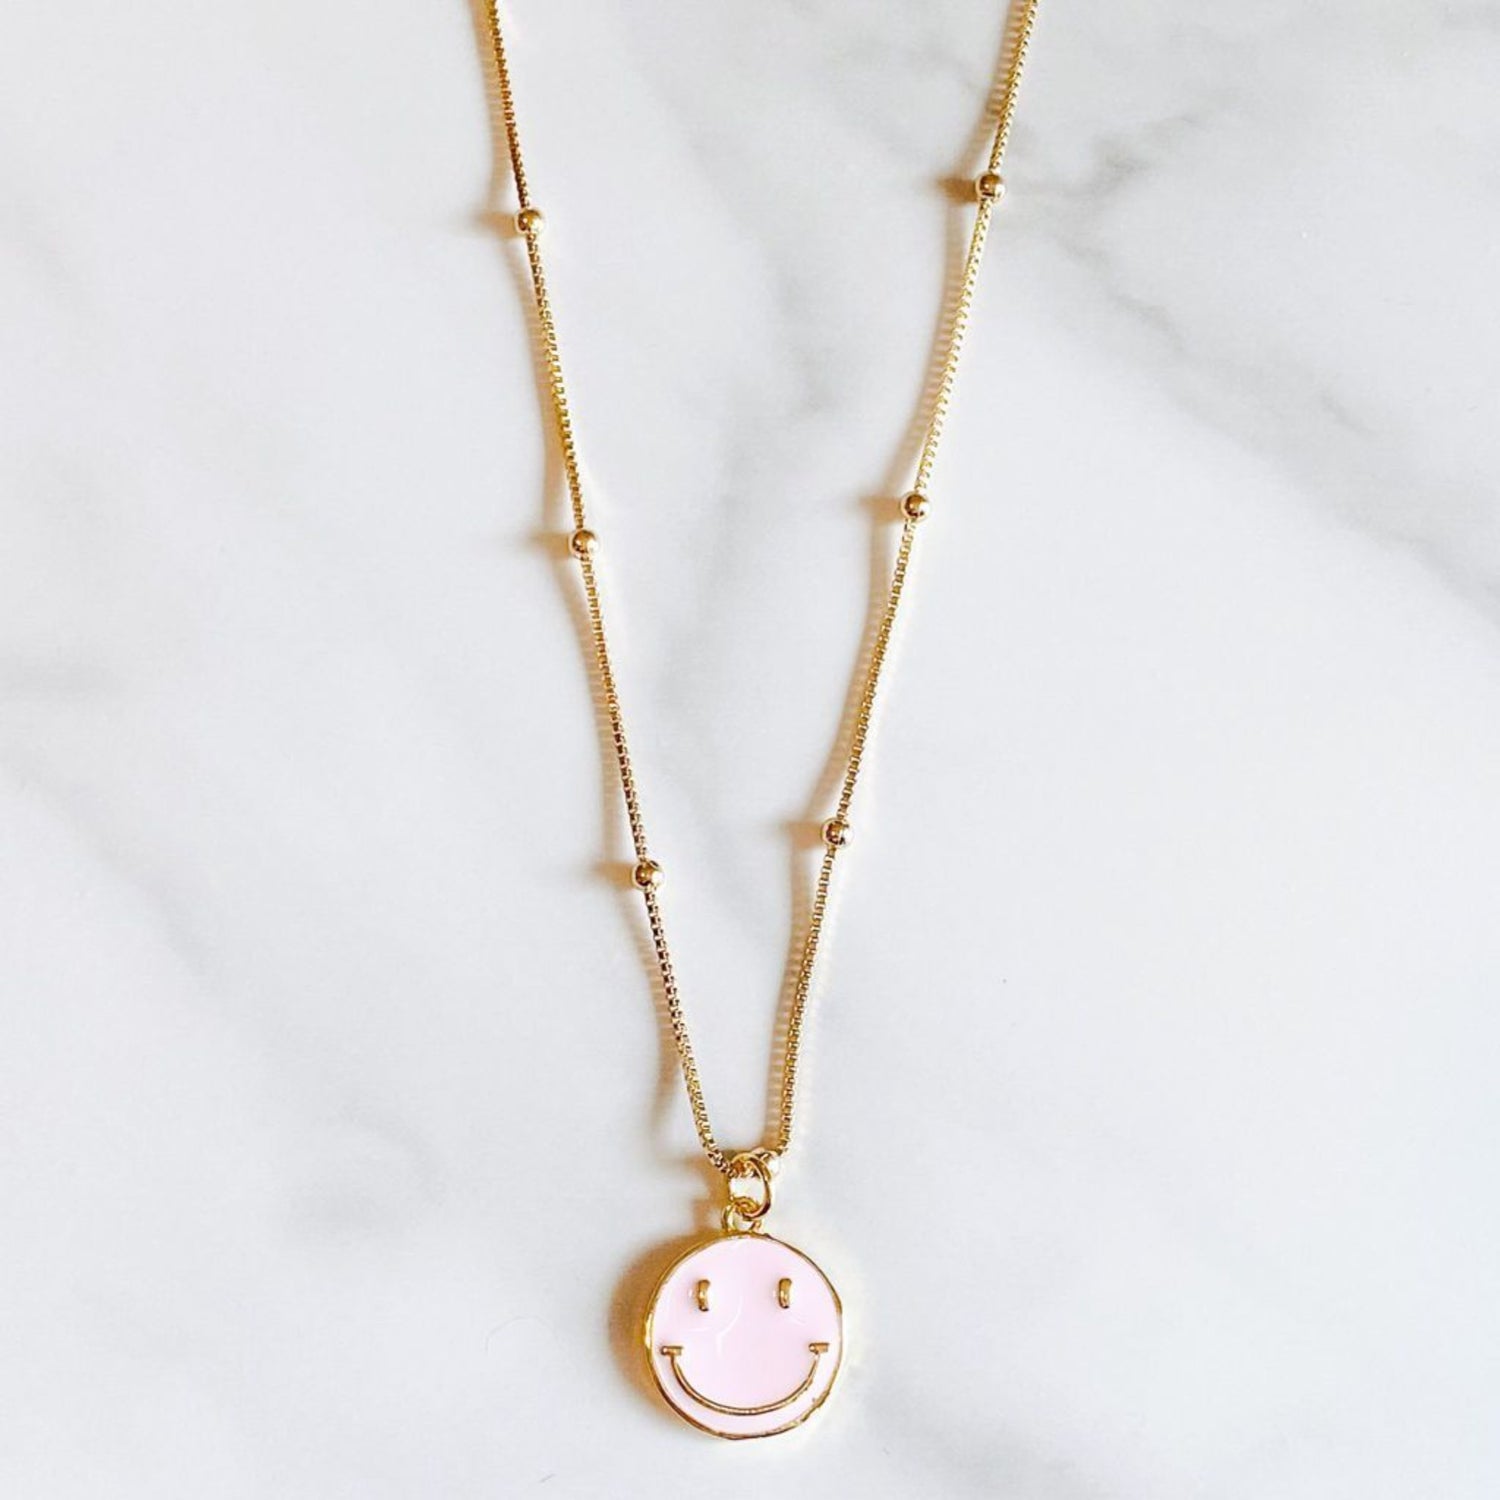 Pink Happy Necklace with a gold-filled chain by ISVI Boutique, Miami